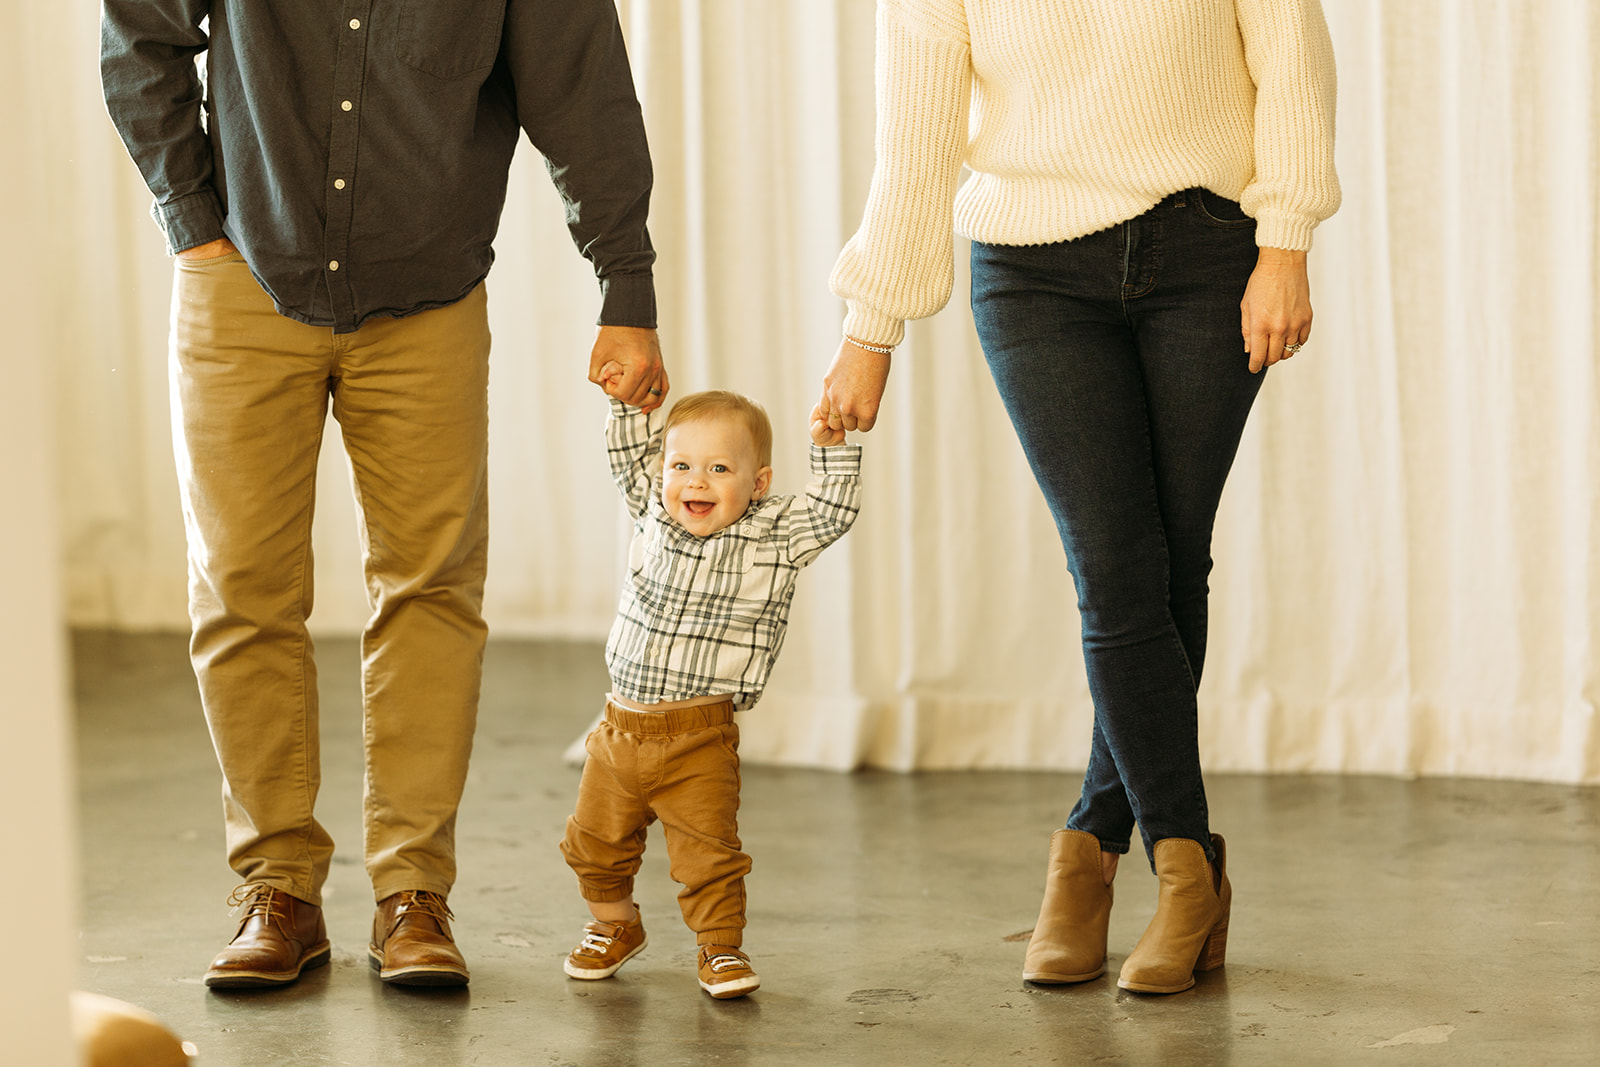 studio family photos with warm neutral outfit tones, small family with baby in denver colorado, family photography inspo